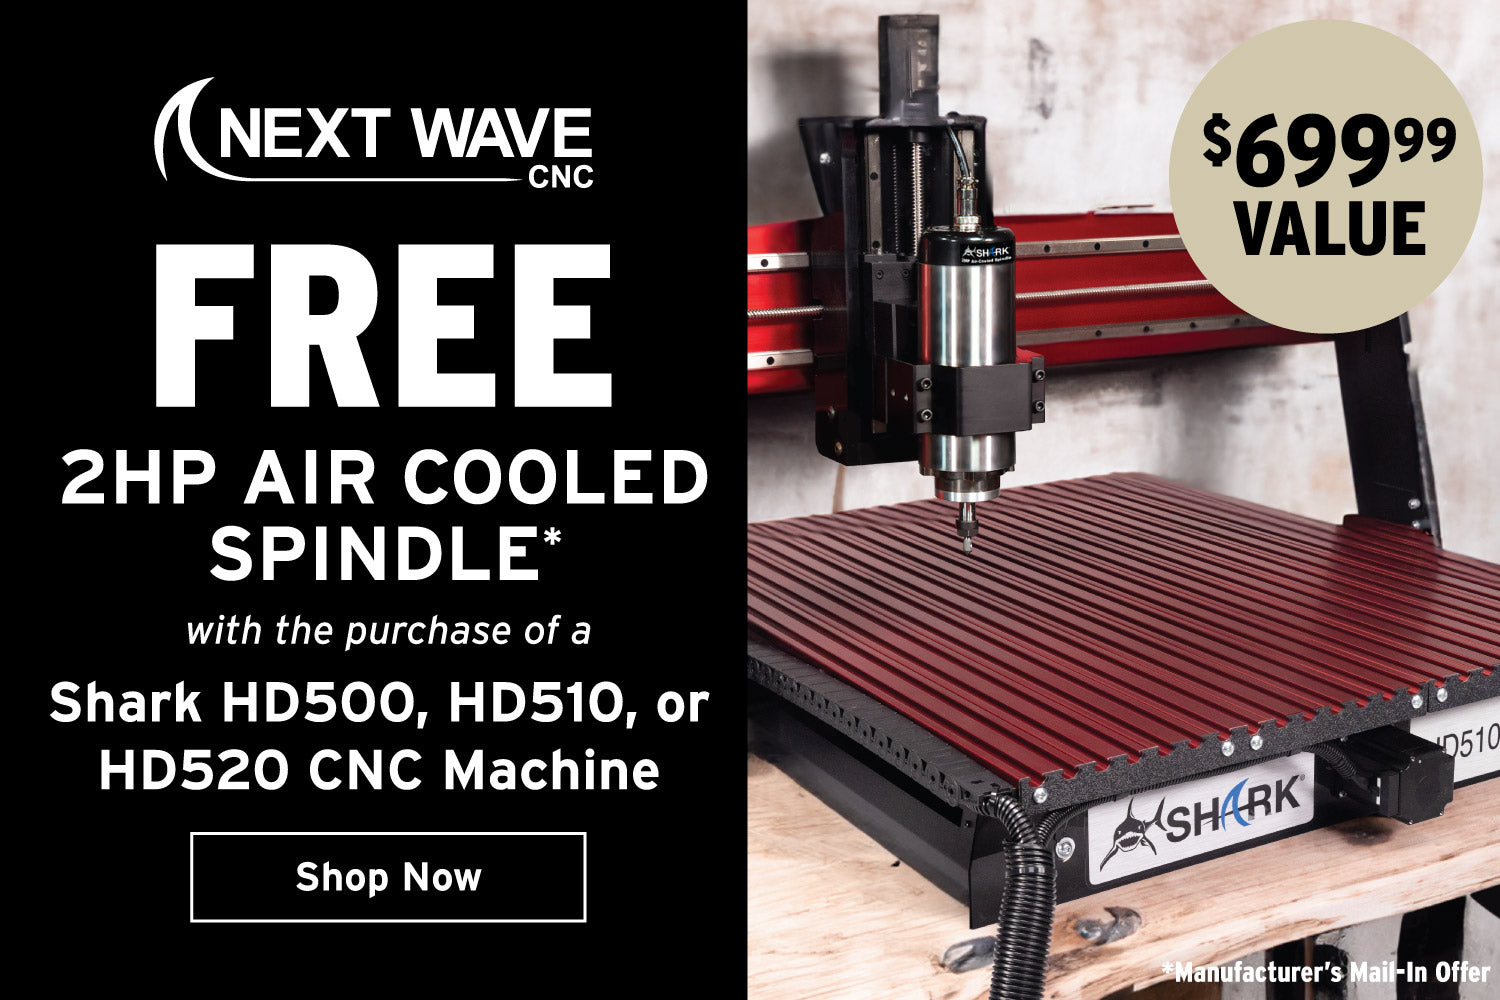 Next Wave CNC. Free 2HP air cooled spindle with the purchase of a Shark HD500, HD510, or HD520 CNC machine.